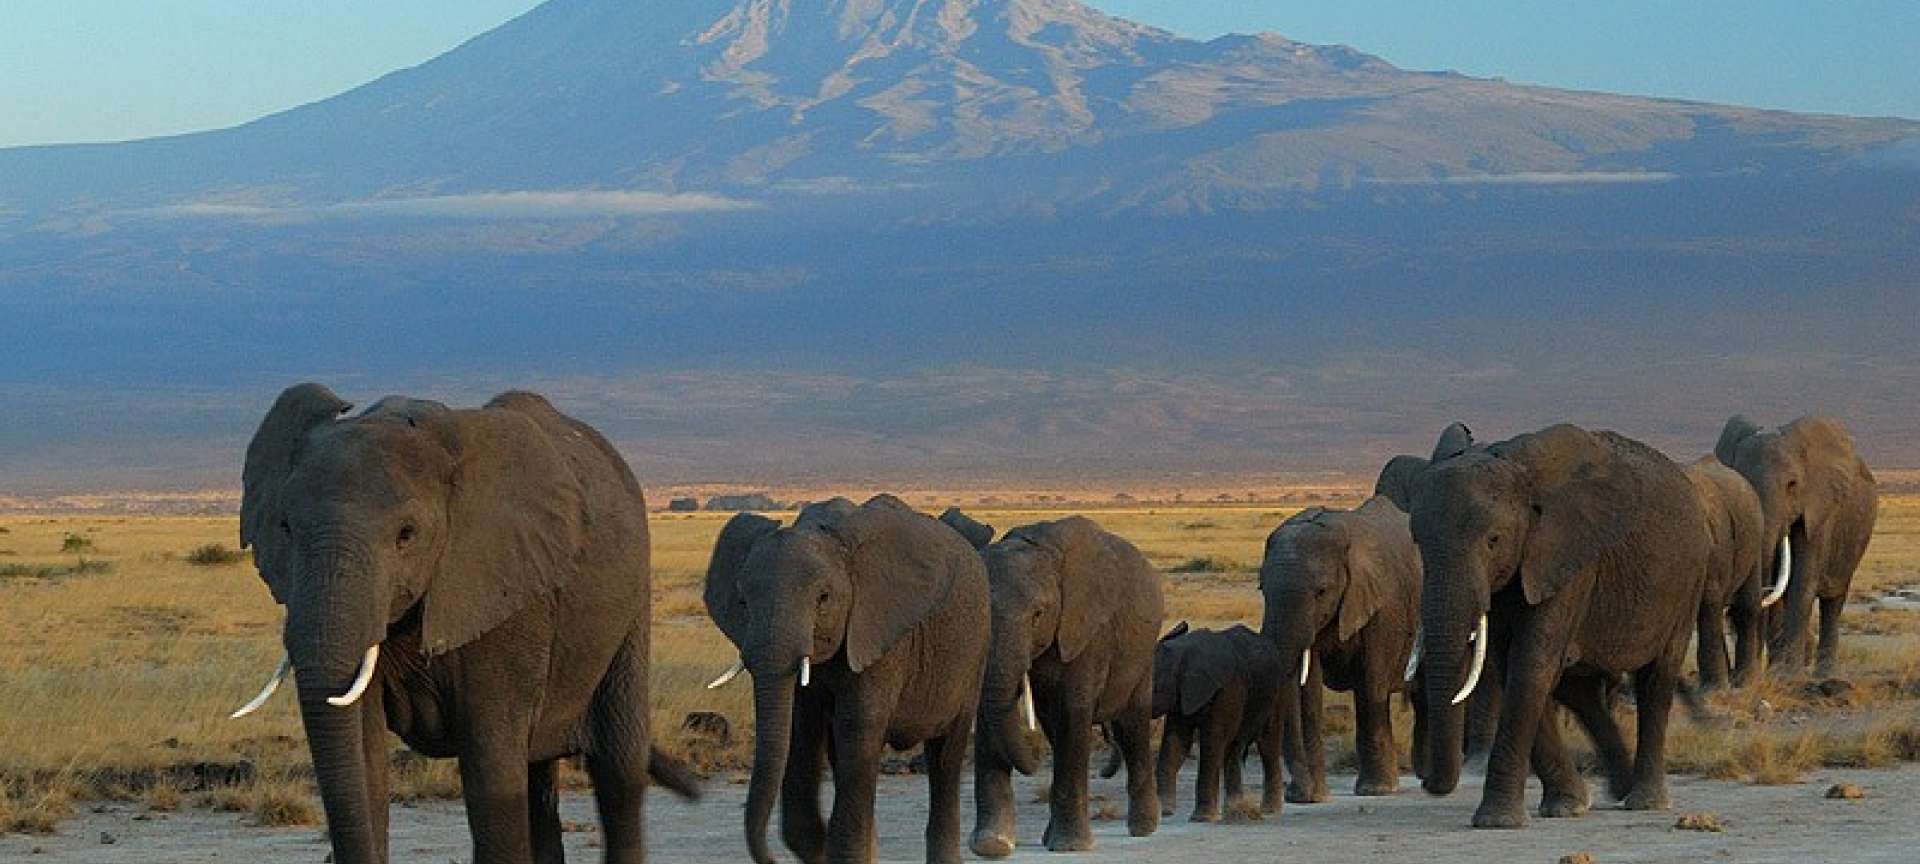 A herd of elephant in Arusha National Park